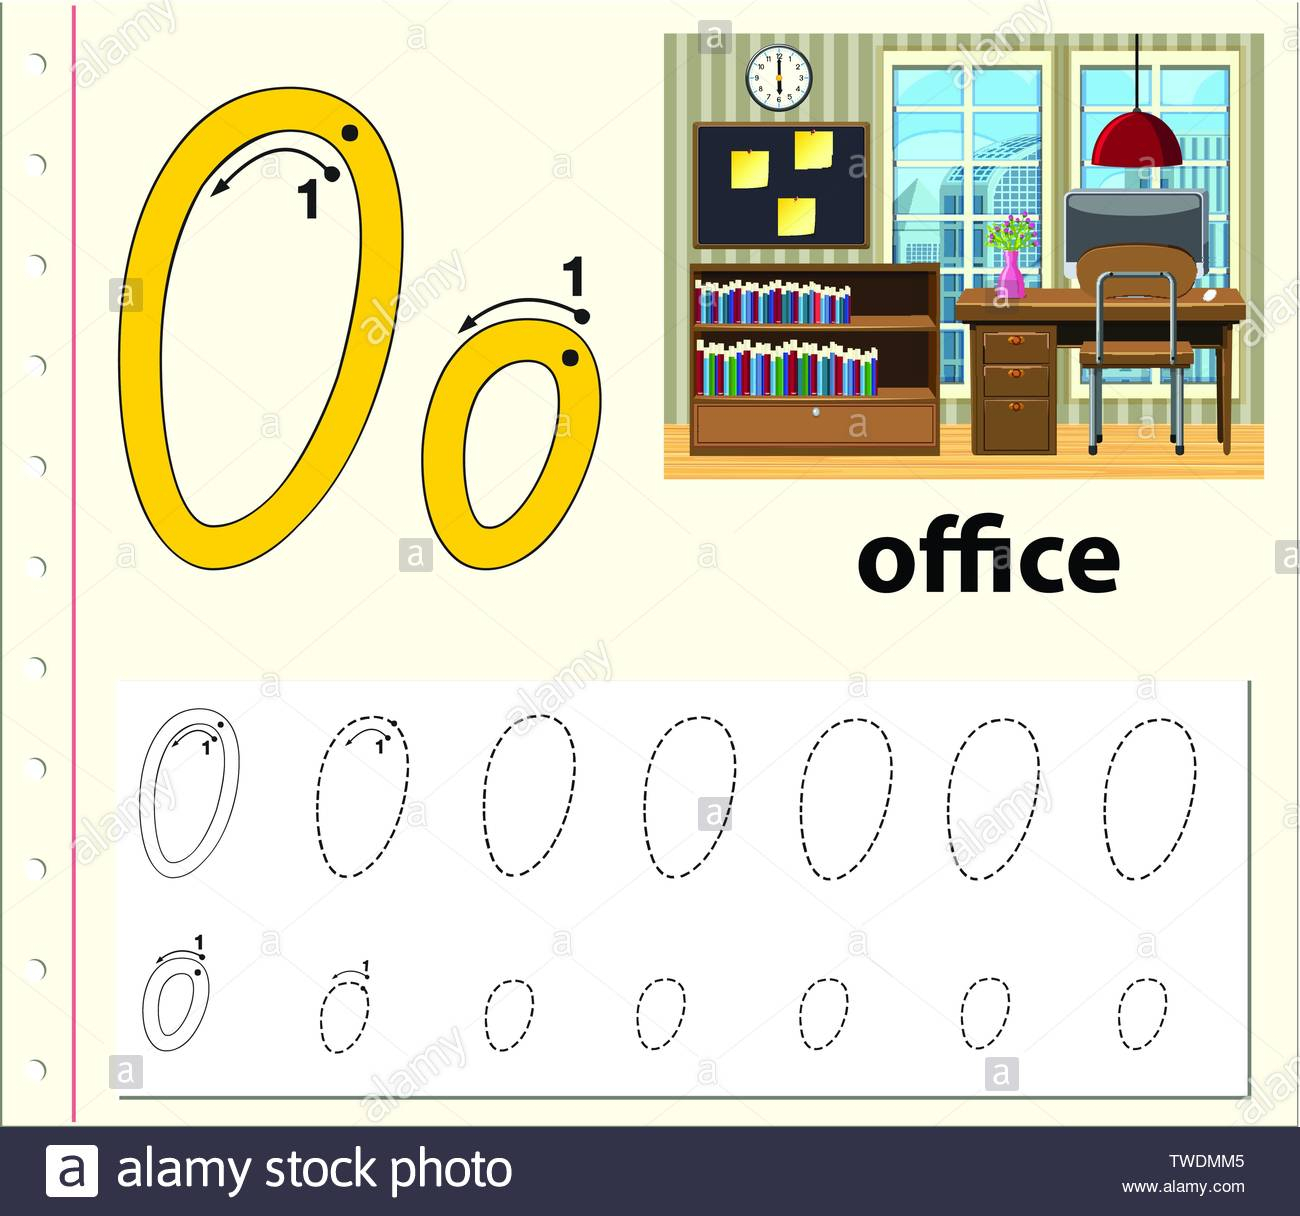 Letter O Tracing Alphabet Worksheets Illustration Stock within Tracing Letters Software